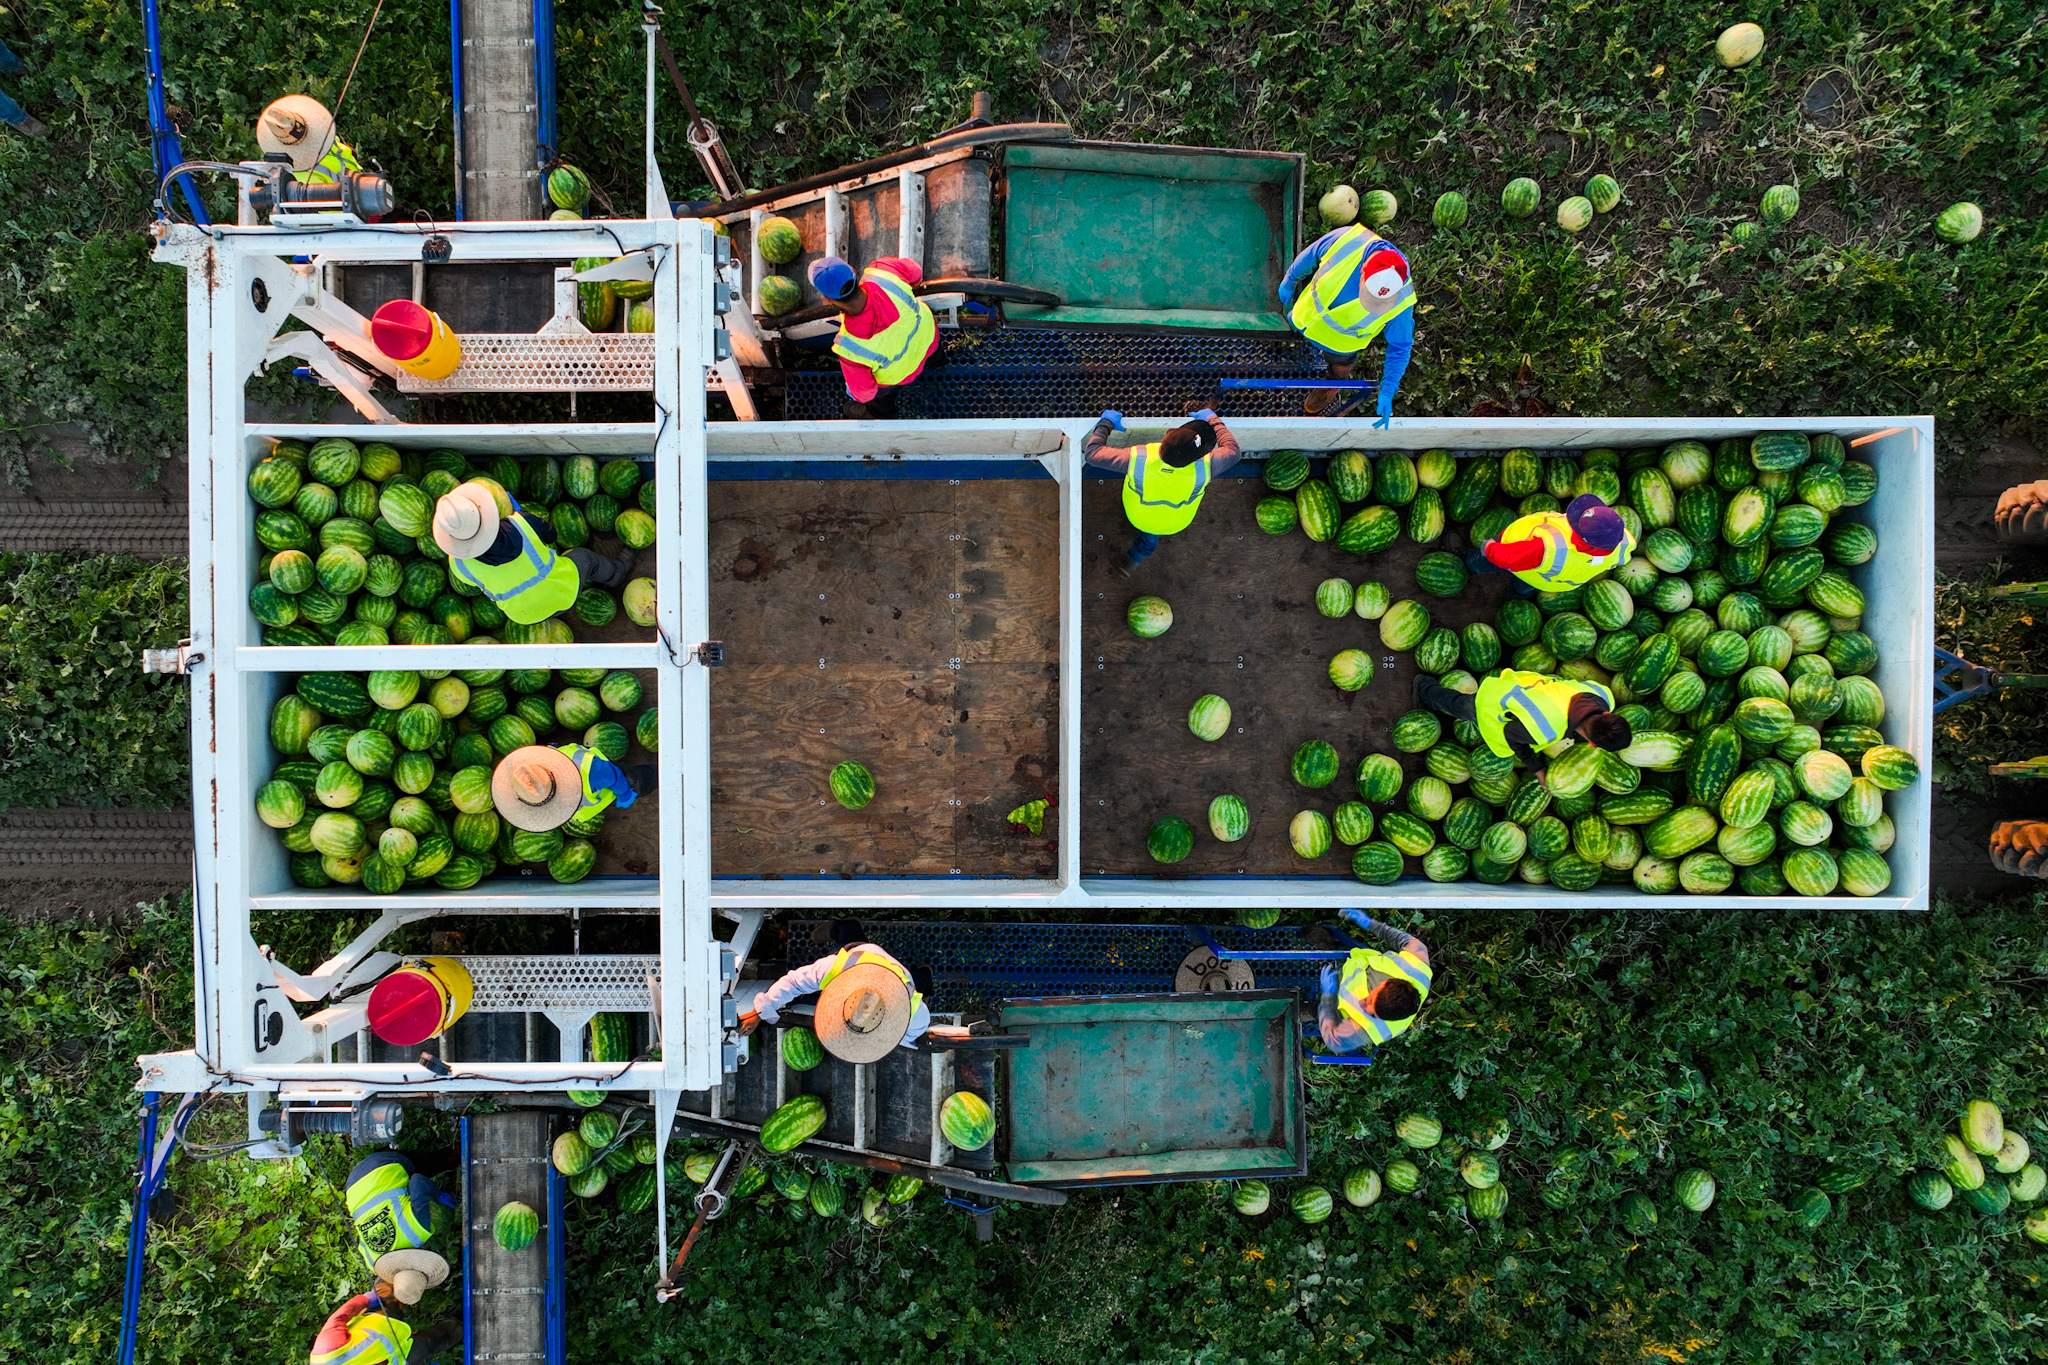 Overhead view of watermelons being harvested